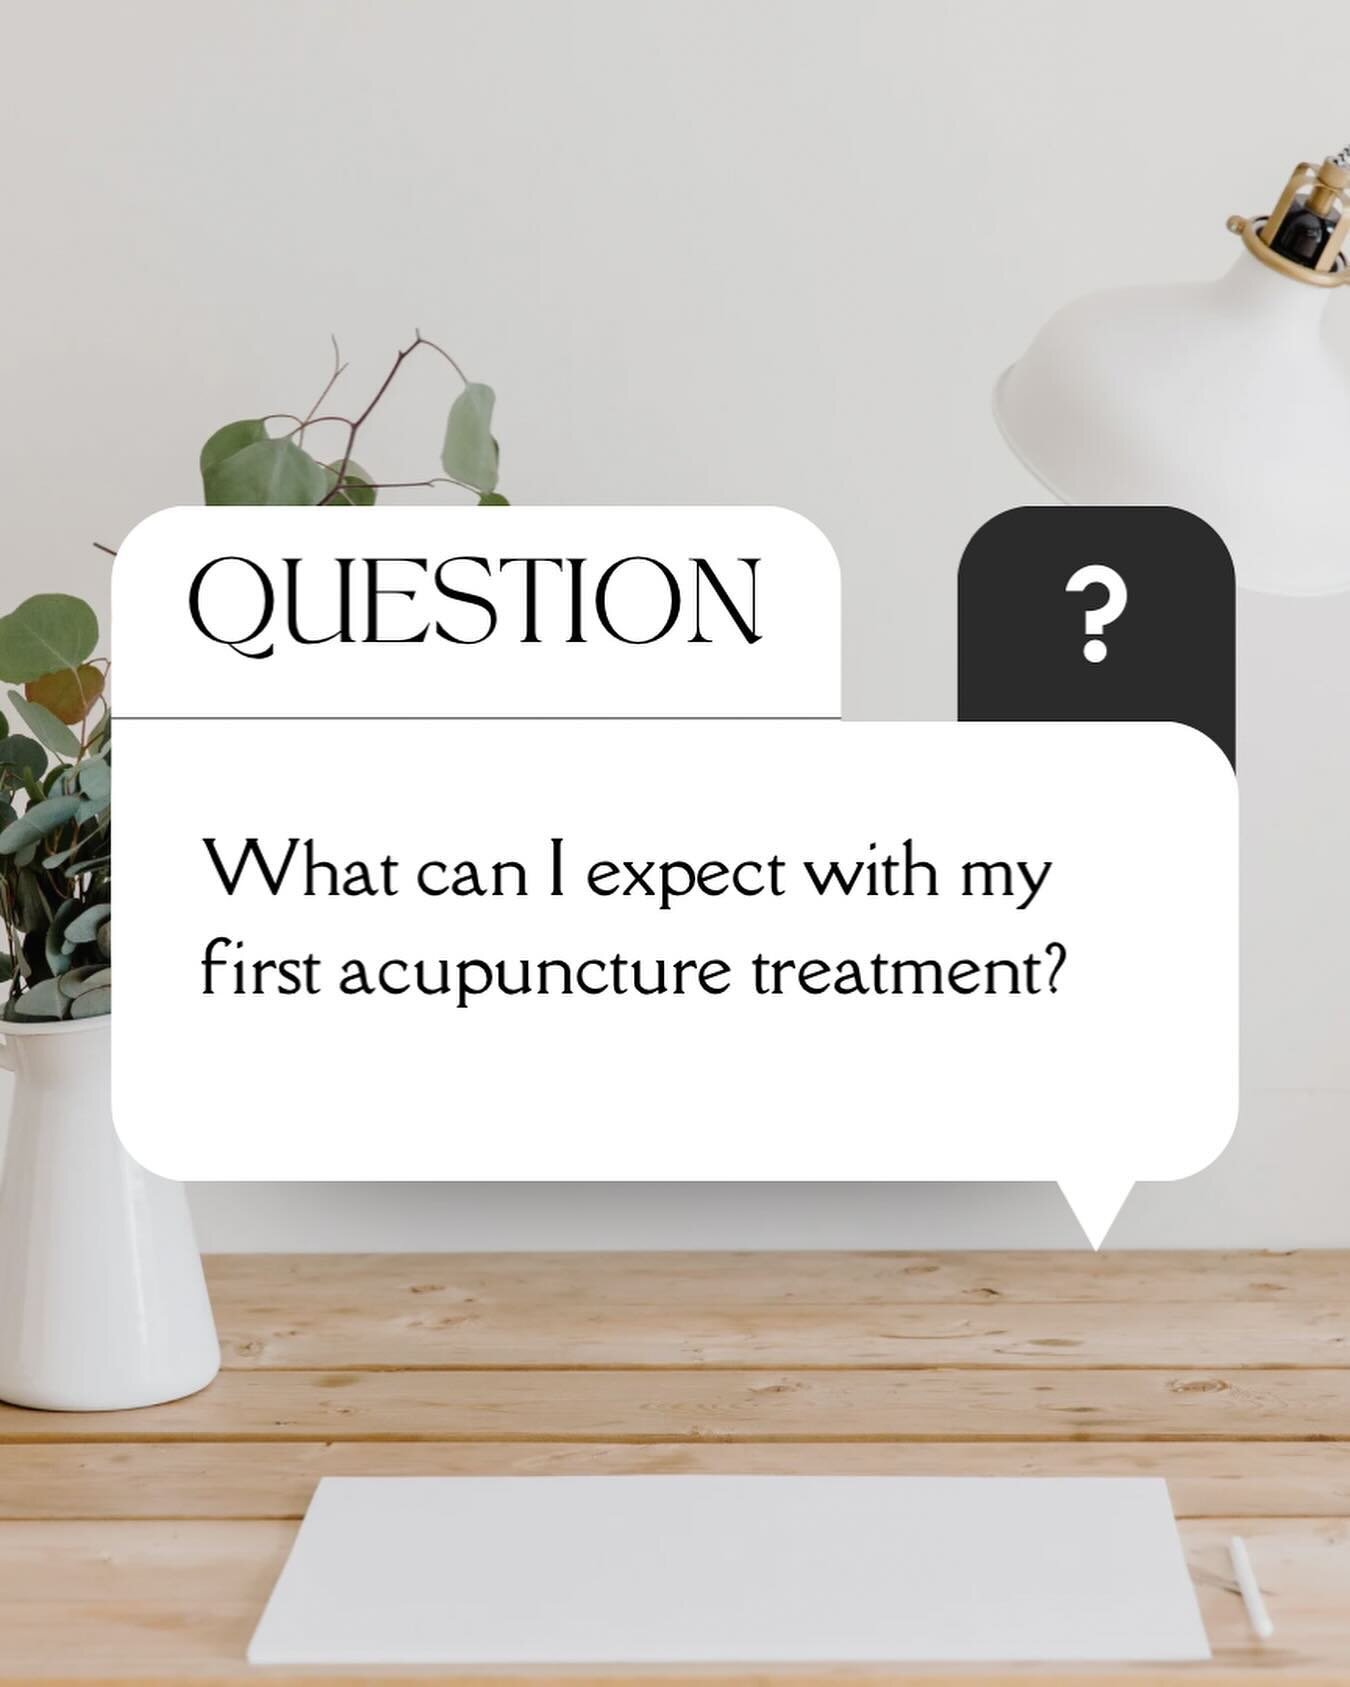 🌿Every acupuncturist will be slightly different even though the foundations of what we learn in school are the same. Everyone has their own style and adjunct therapies. 

🌿How it looks at my clinic: prior to the first treatment, you will fill out a